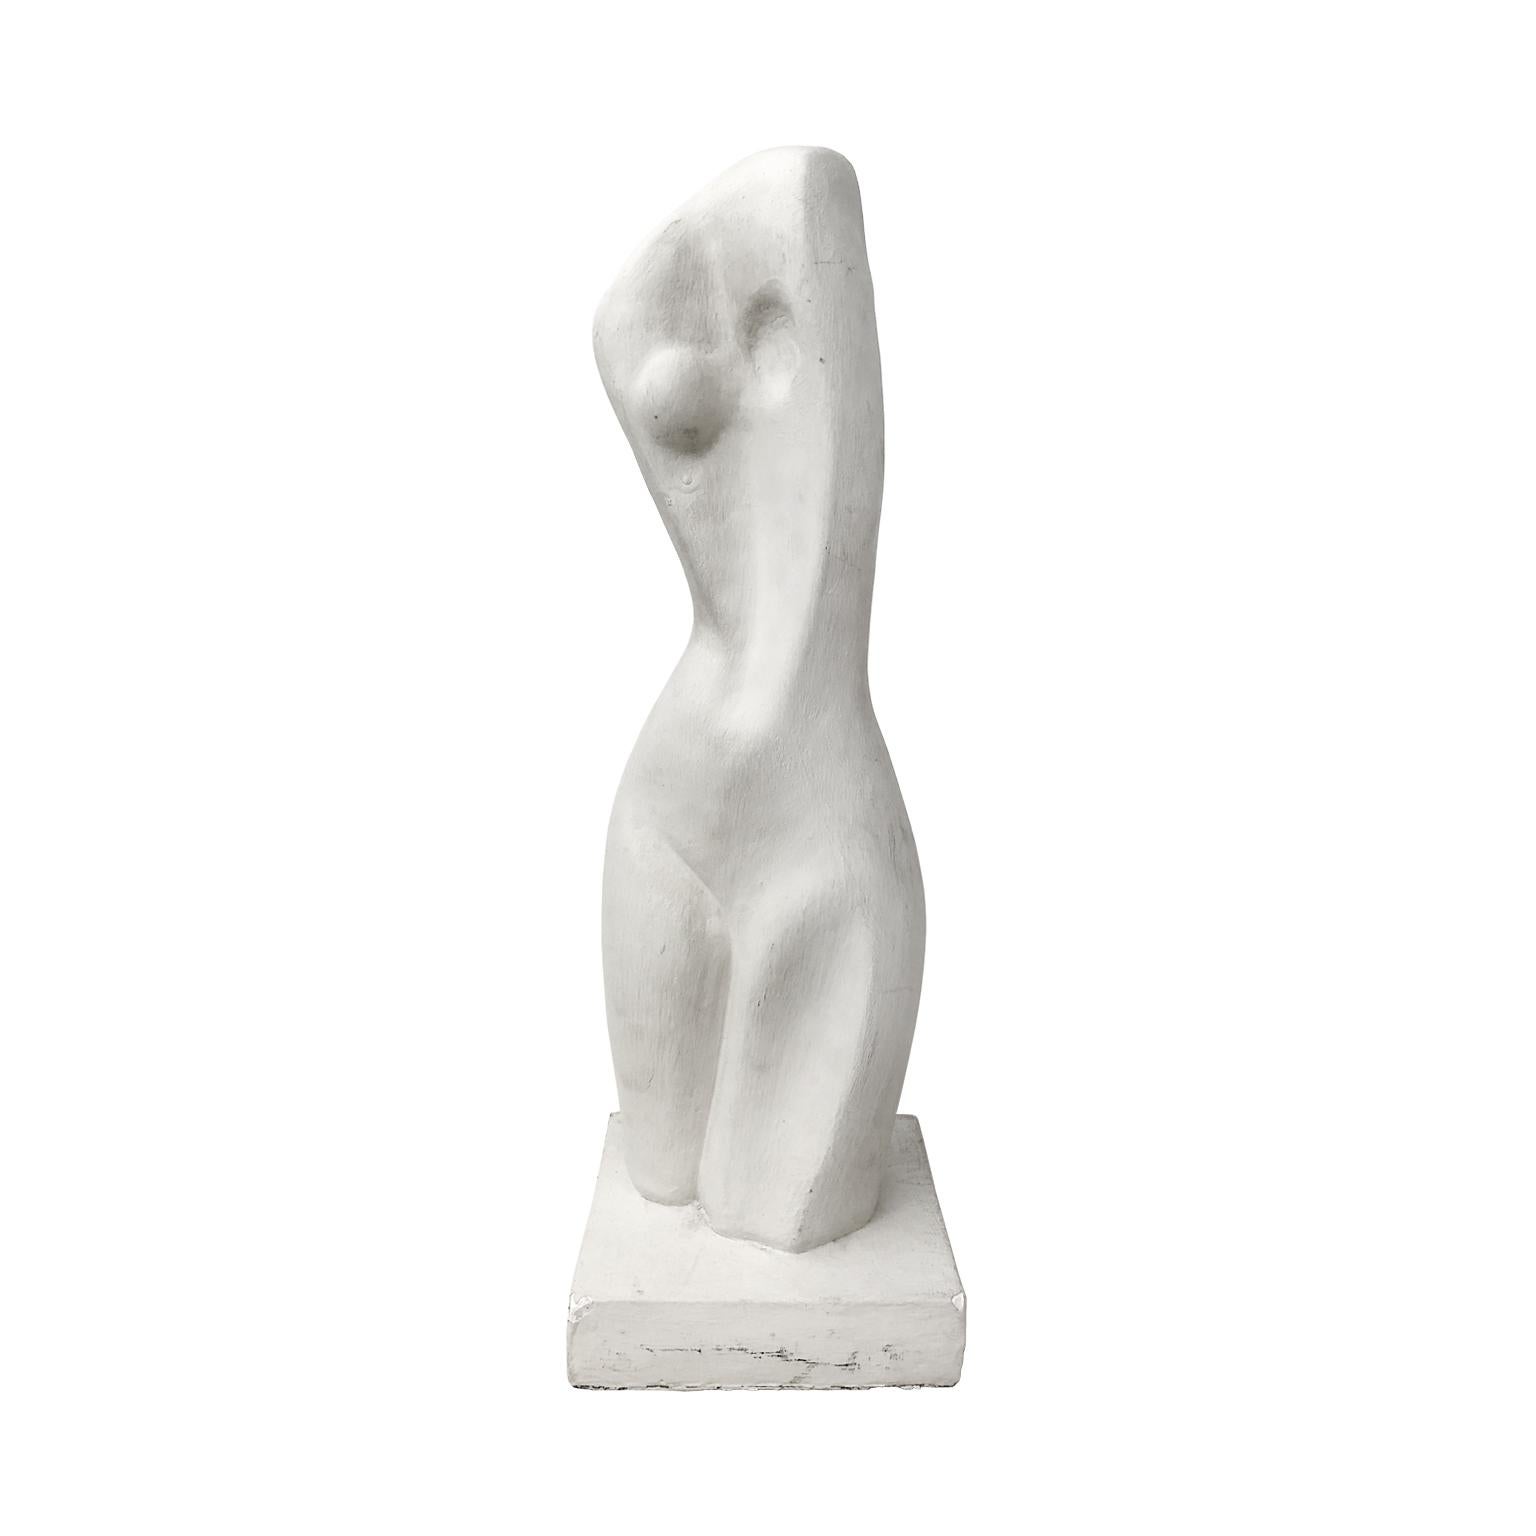 1970s Abstract Plaster Female Torso Sculpture